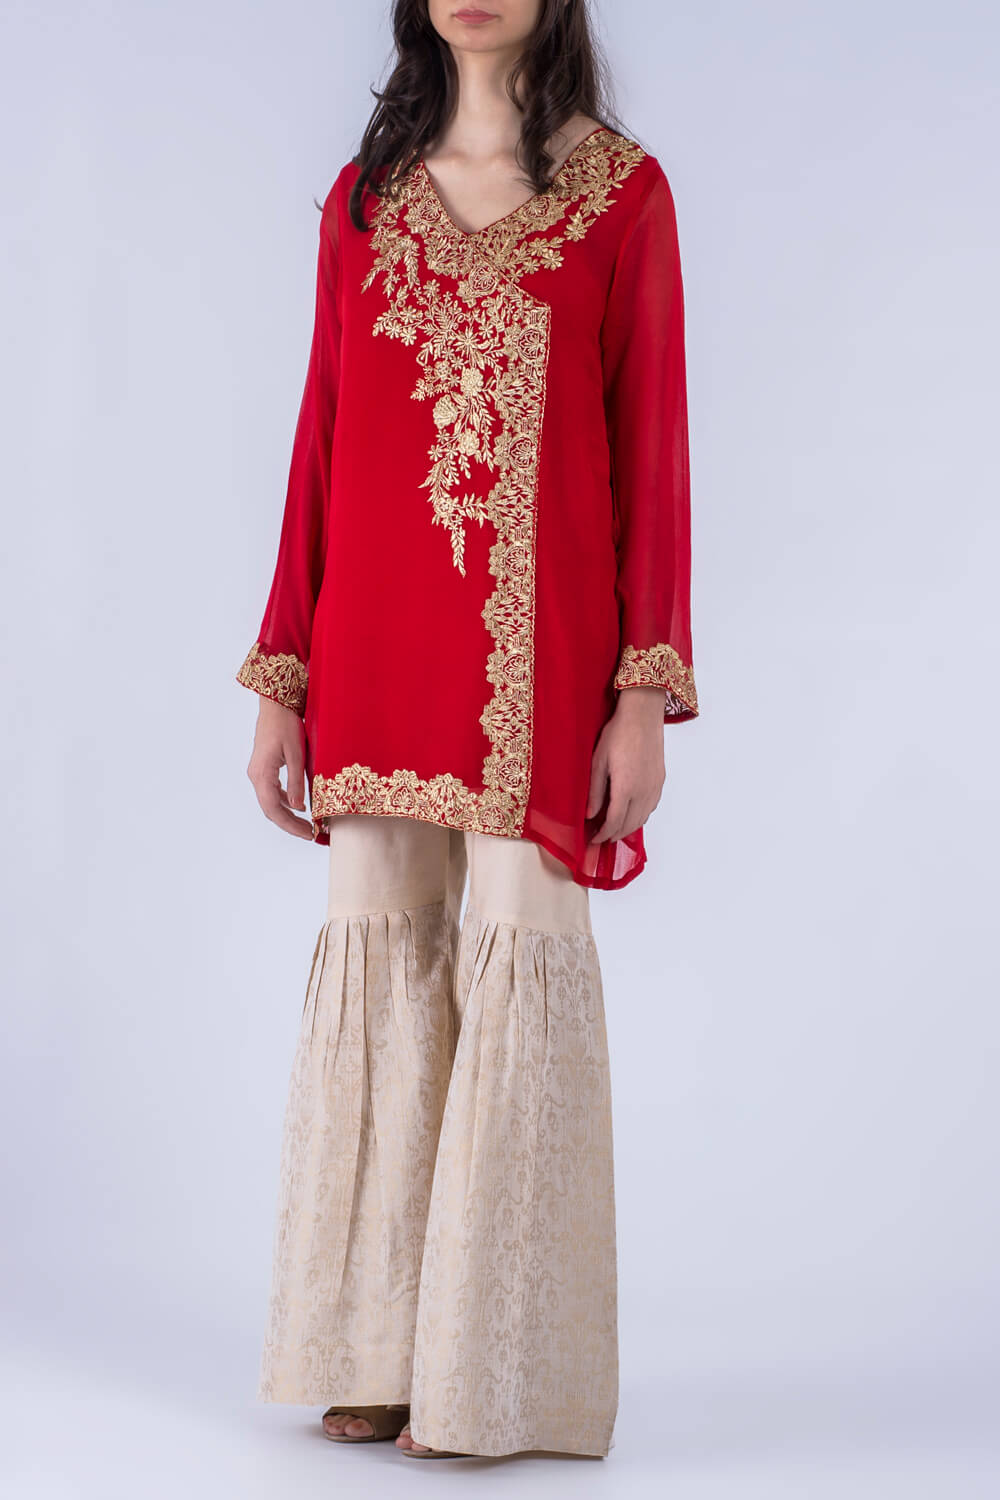 Royal red tilla embroidered pret wear kurti by Breakout EAST evening wear 2019